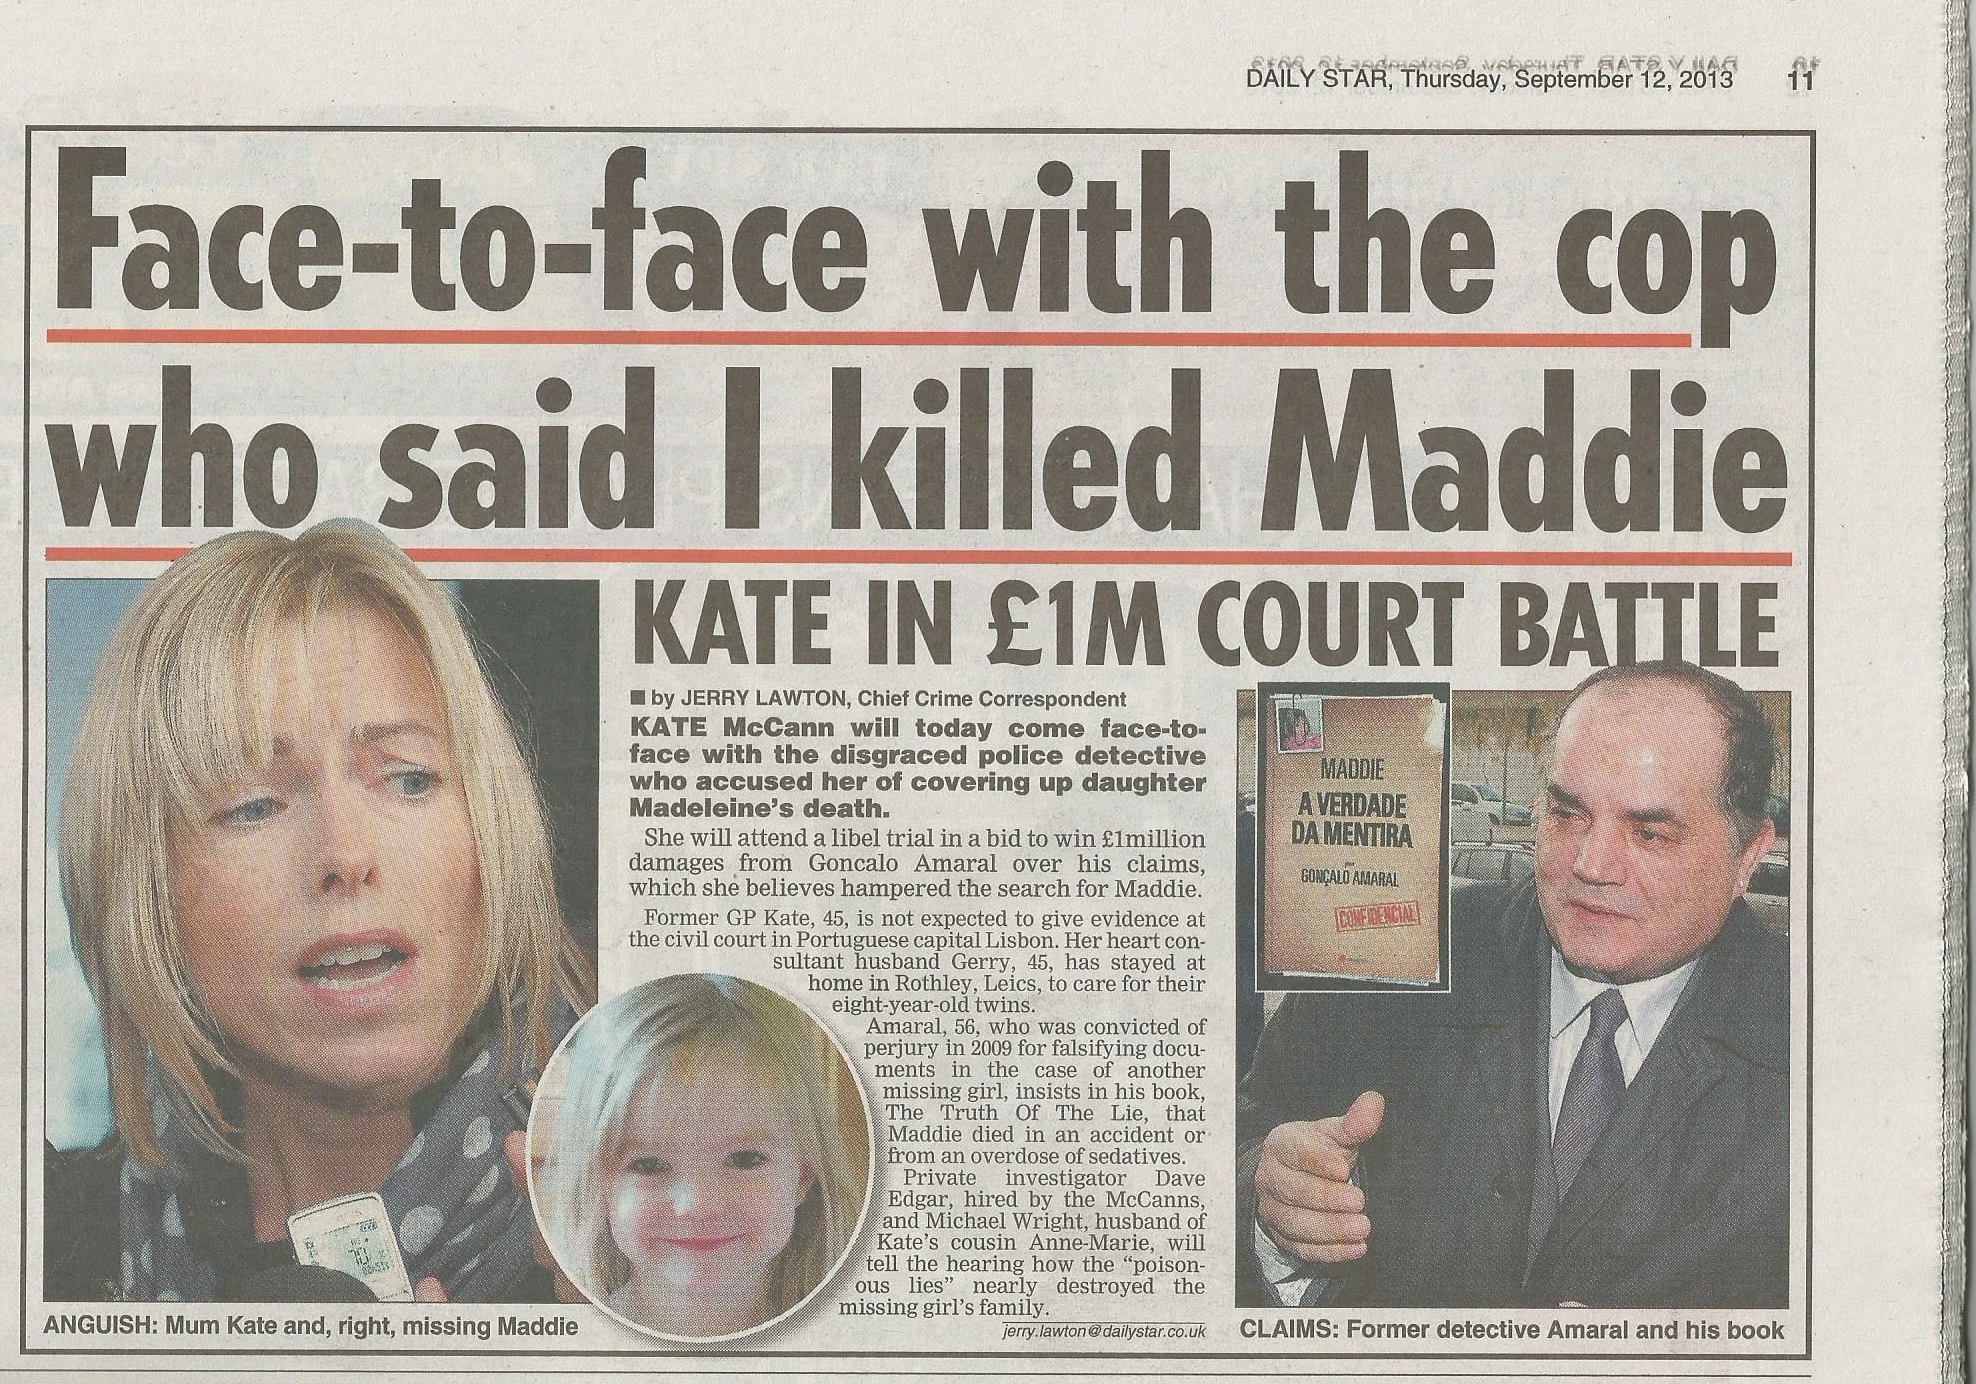 Daily Star, paper edition: 'Face-to-face with the cop who said I killed Maddie', 12 September 2013